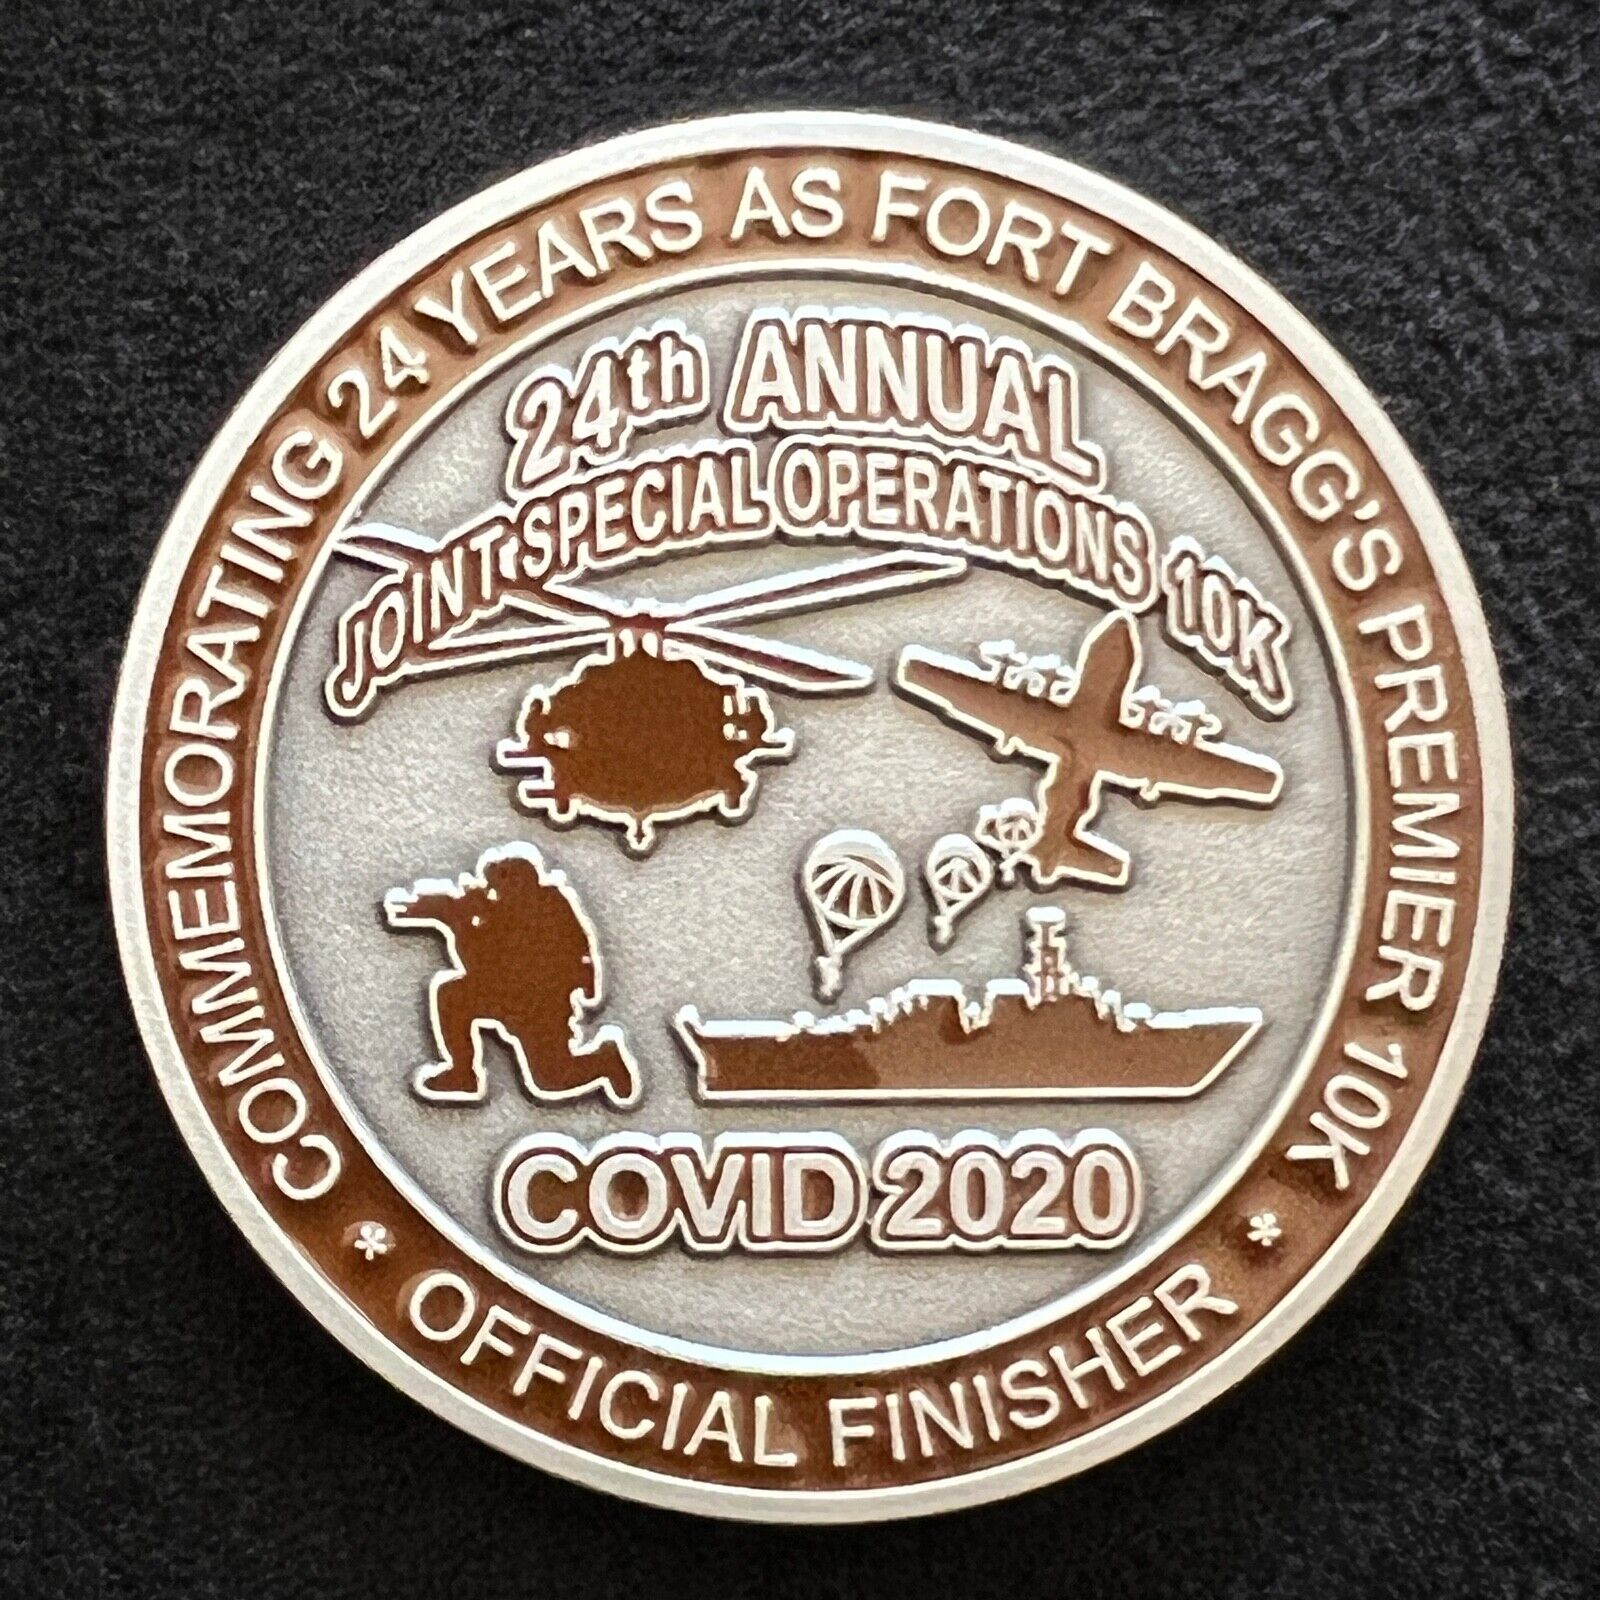 24th Annual Joint Special Operations 10K Official Finisher Challenge Coin